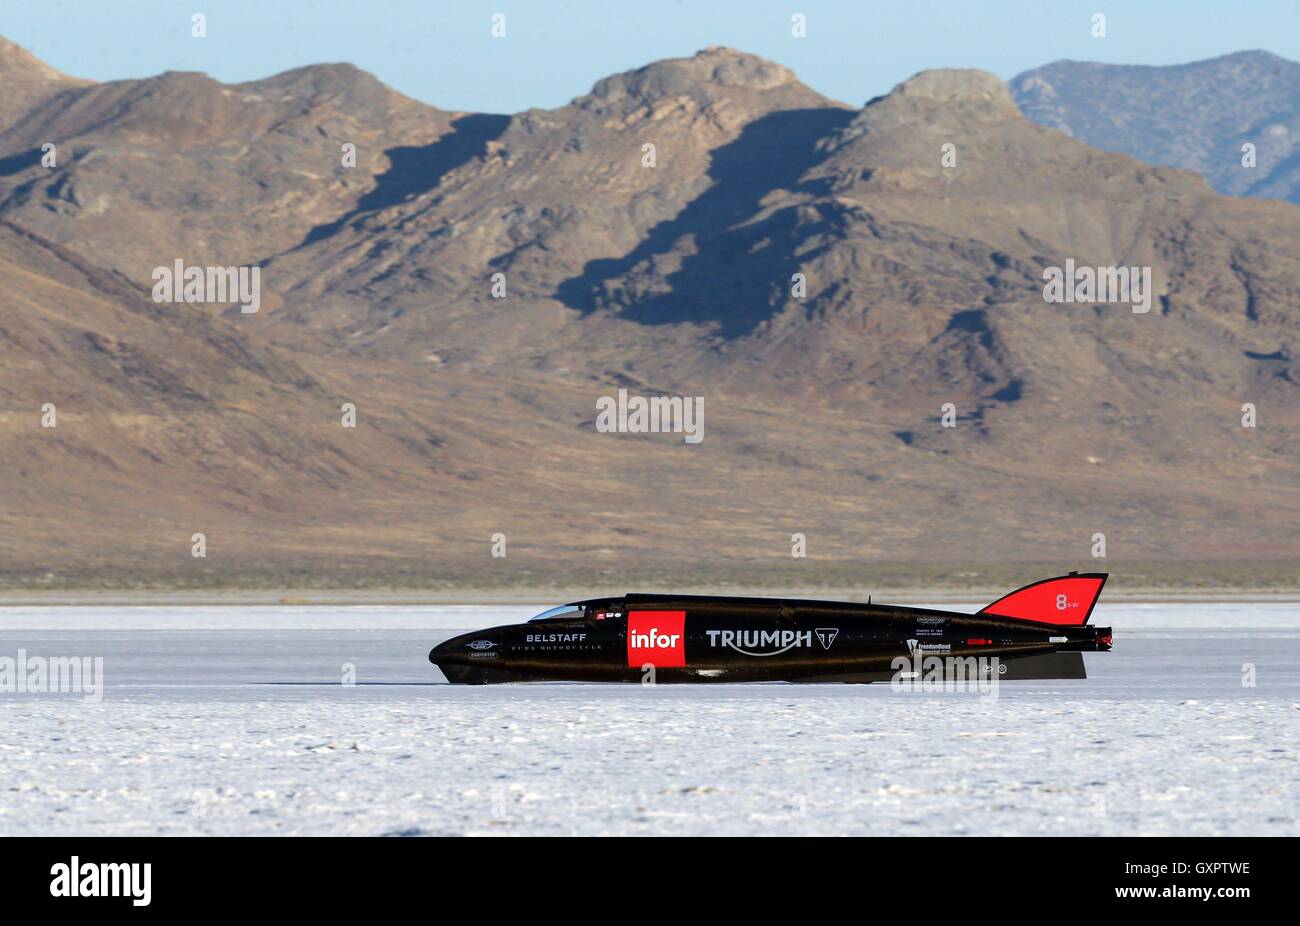 Land speed record triumph The Motorcycle